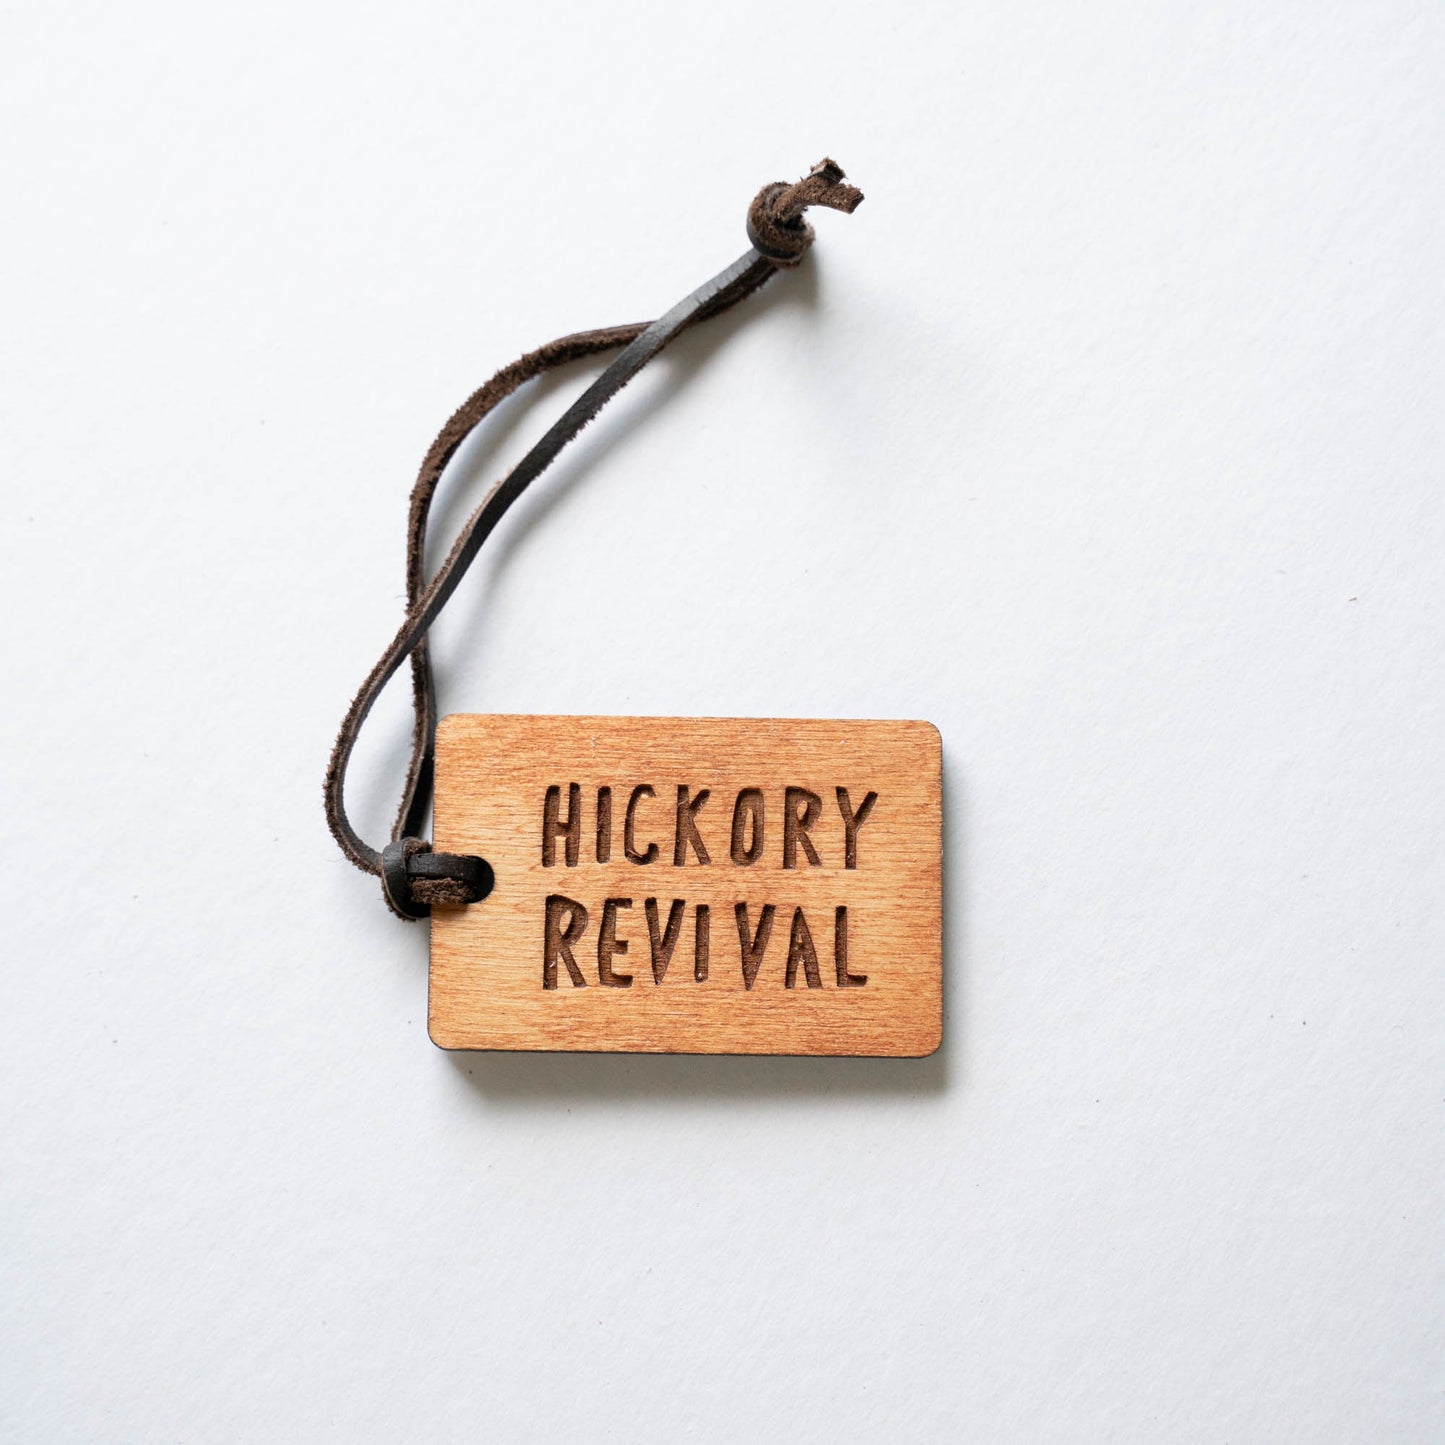 Hickory Revival bag tag - Rectangle stamp, brown leather